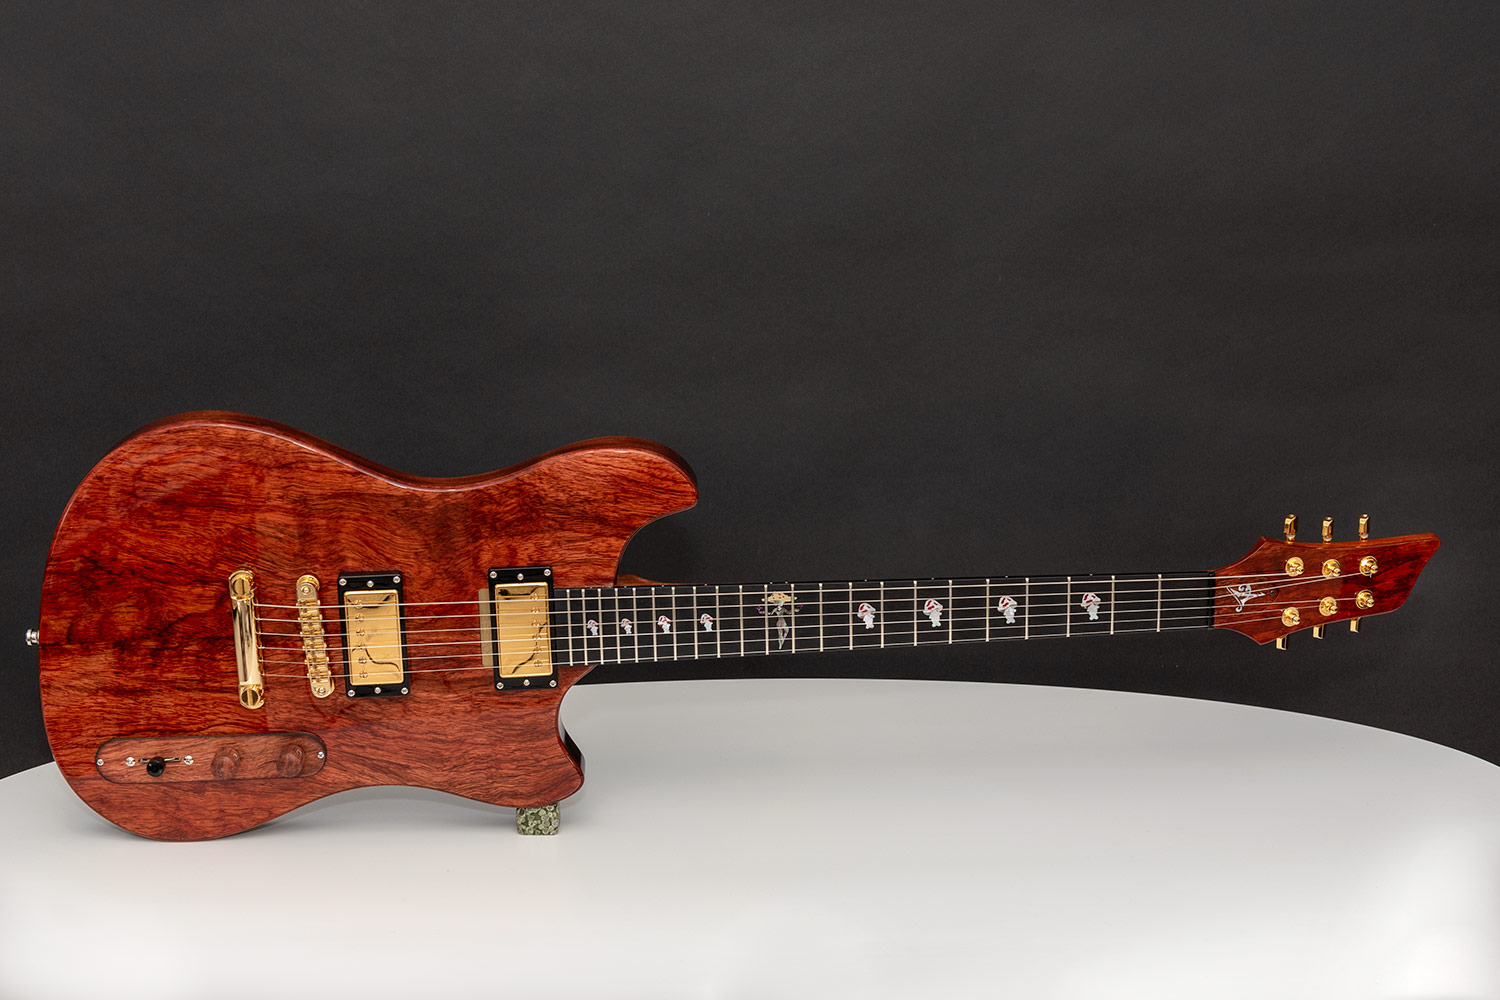 This guitar is called Mushy and was built by - Augustin is a luthier with over 15 years of experience, specializing in custom guitars